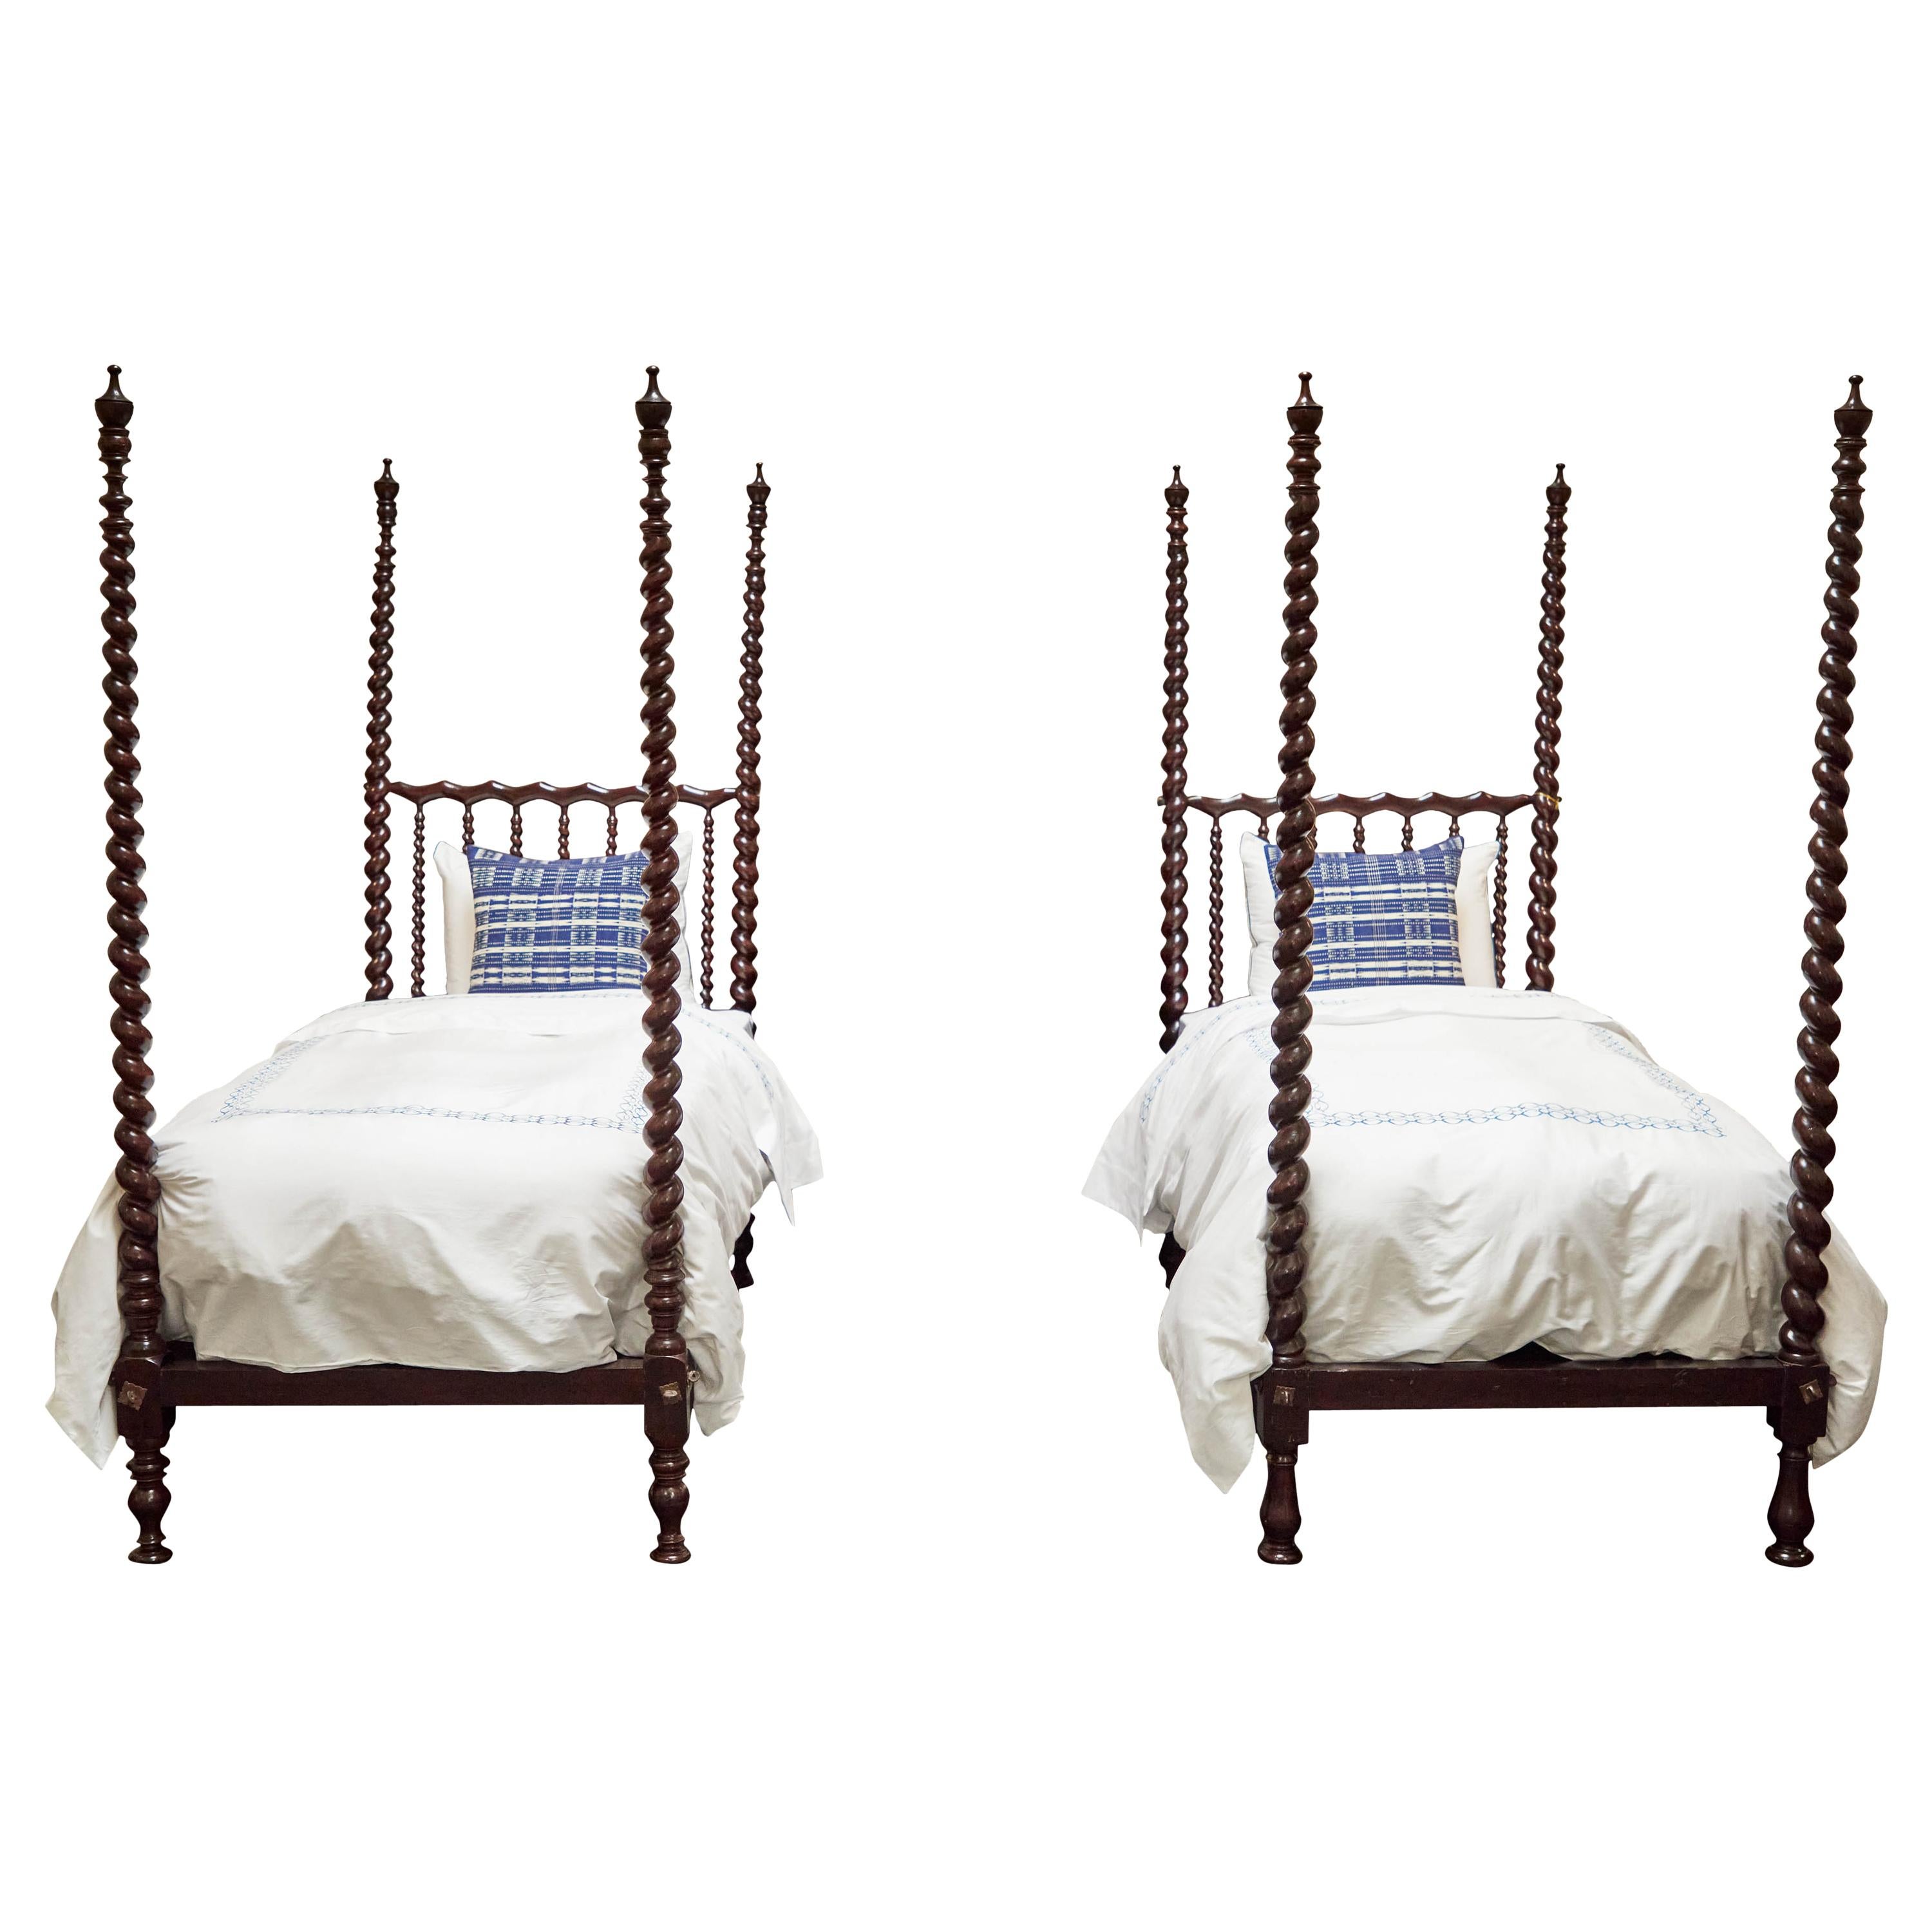 Pair of Early 20th Century Spanish Majorcan Walnut Poster Beds